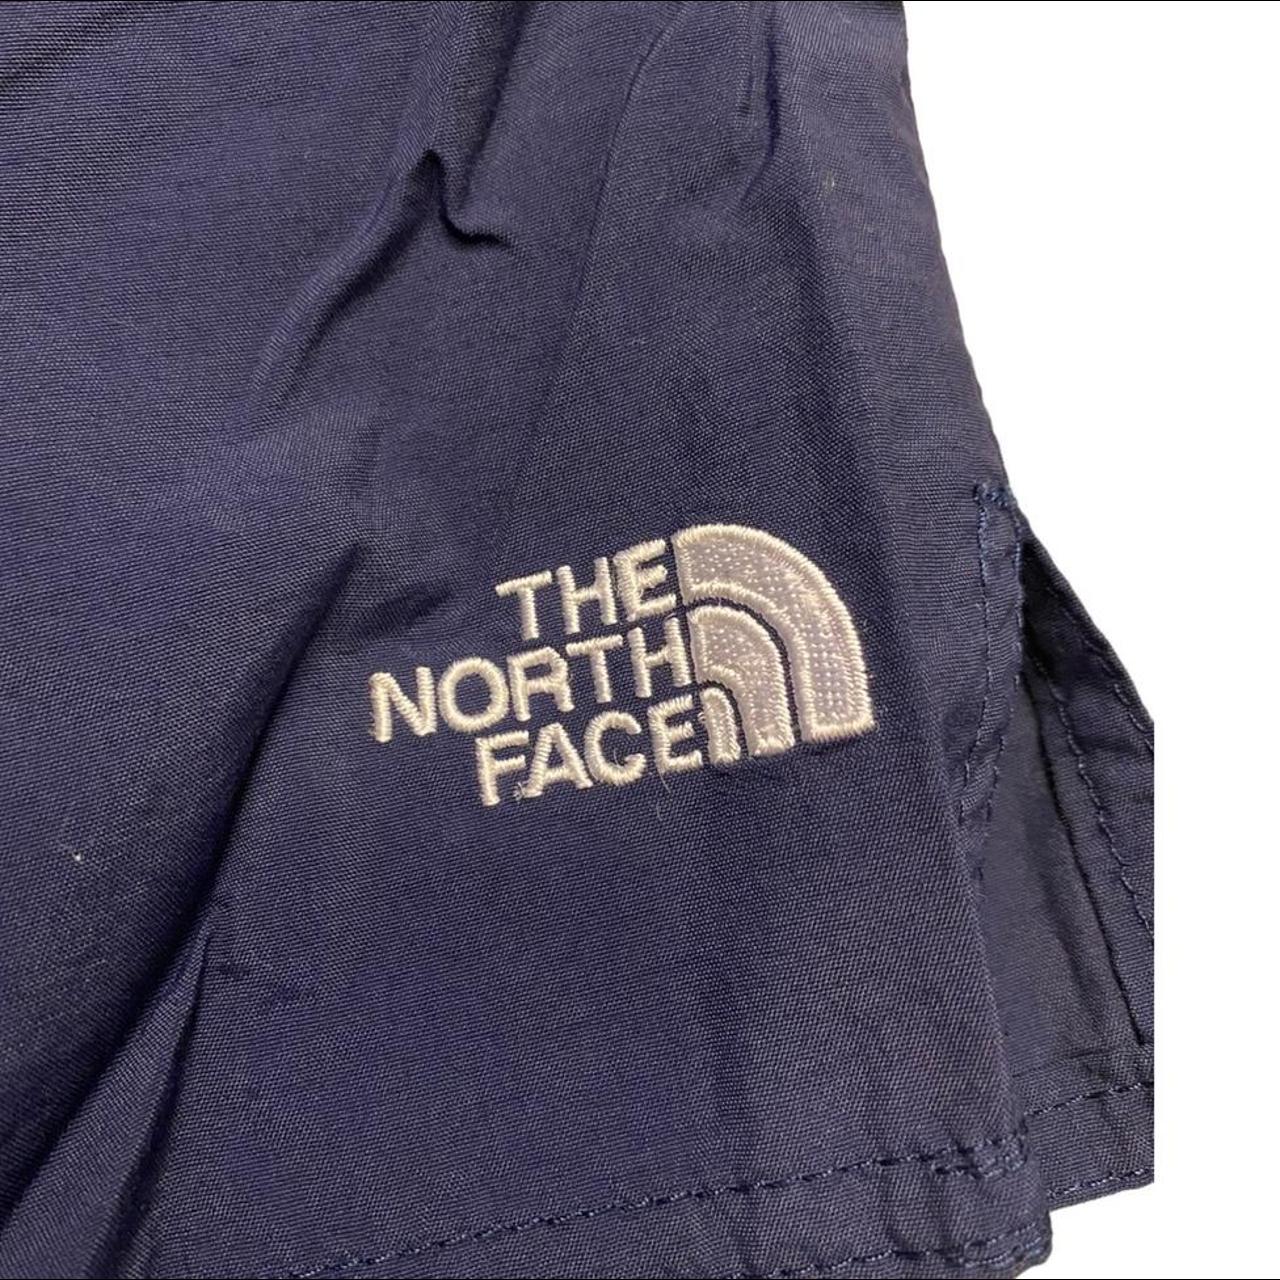 The North Face Men's Navy and White Shorts (4)